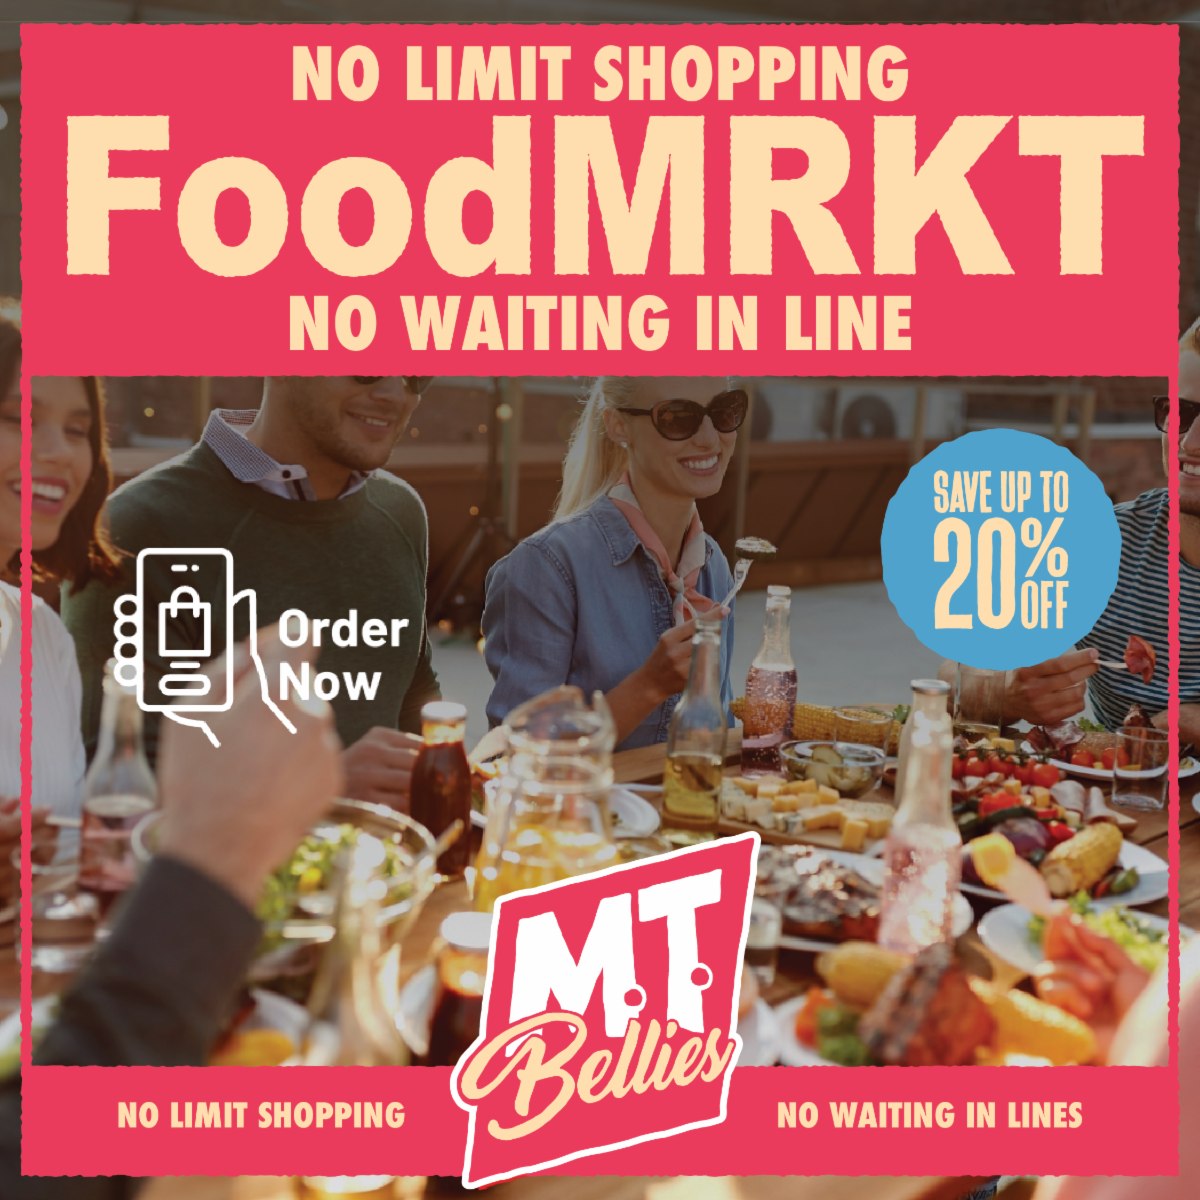 Last Chance! M.T. Bellies FoodMRKT – Place Your Order by 1pm Monday June 5th!